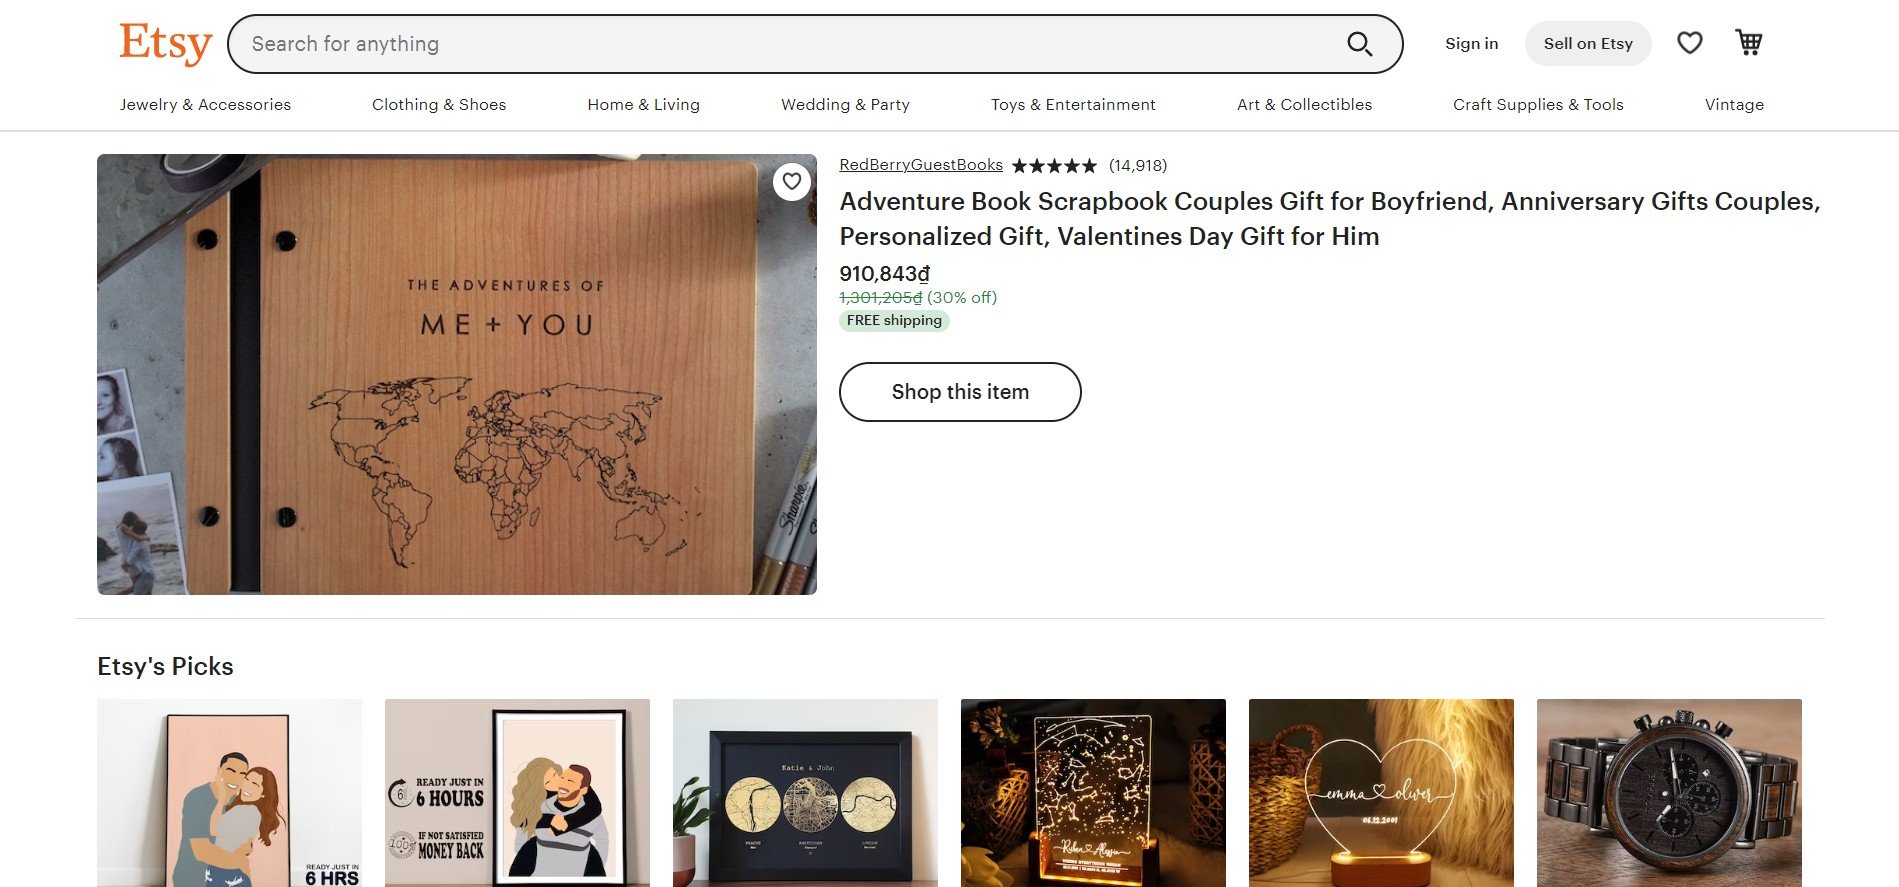 Etsy advertises itself as one of the top-selling platforms